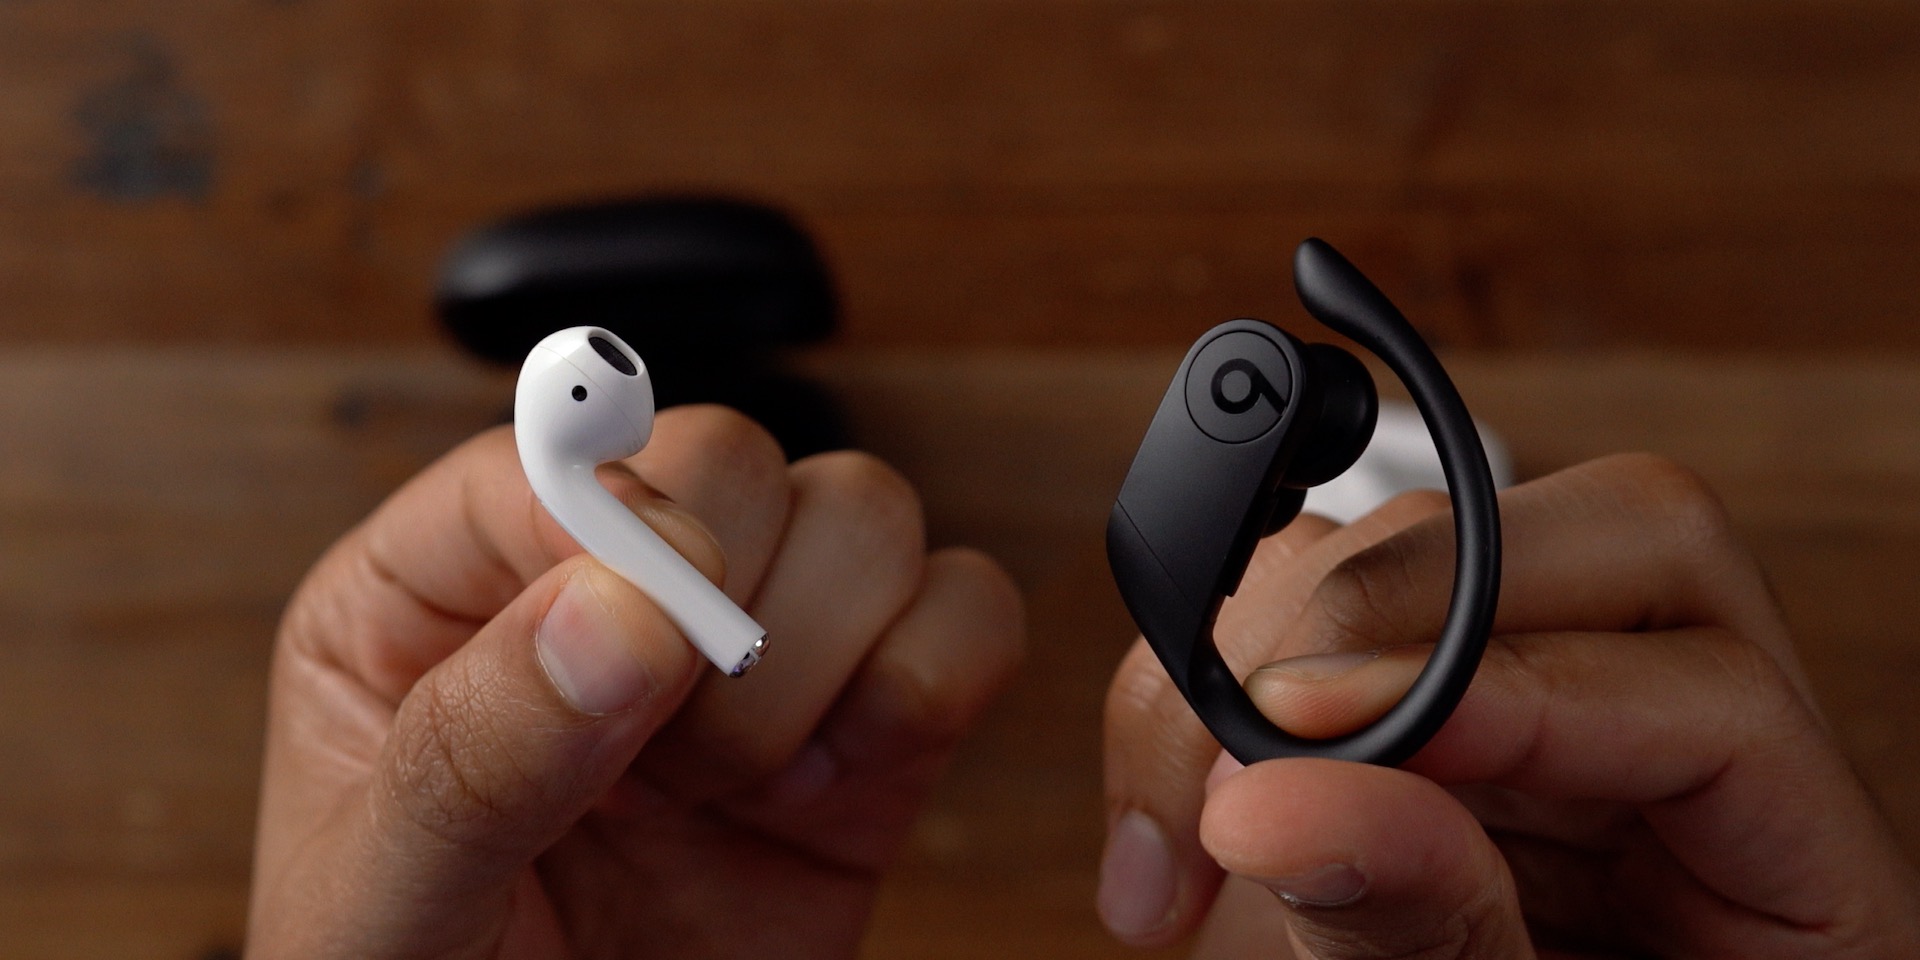 Powerbeats Pro AirPods Earbud compare